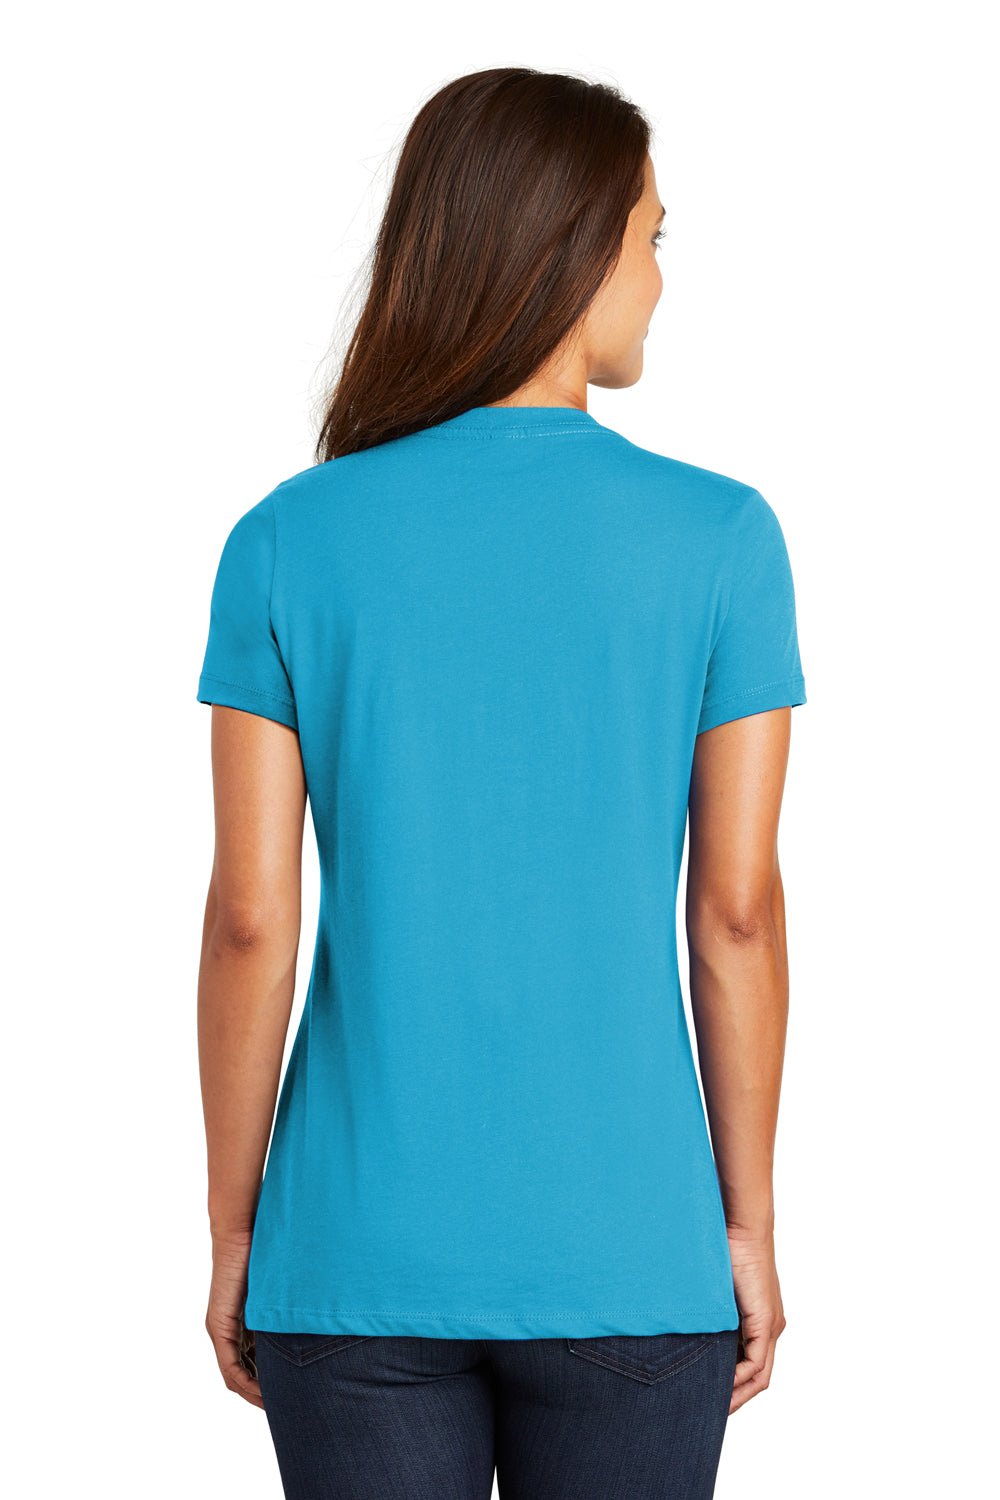 District DM1170L Womens Perfect Weight Short Sleeve V-Neck T-Shirt Turquoise Blue Back